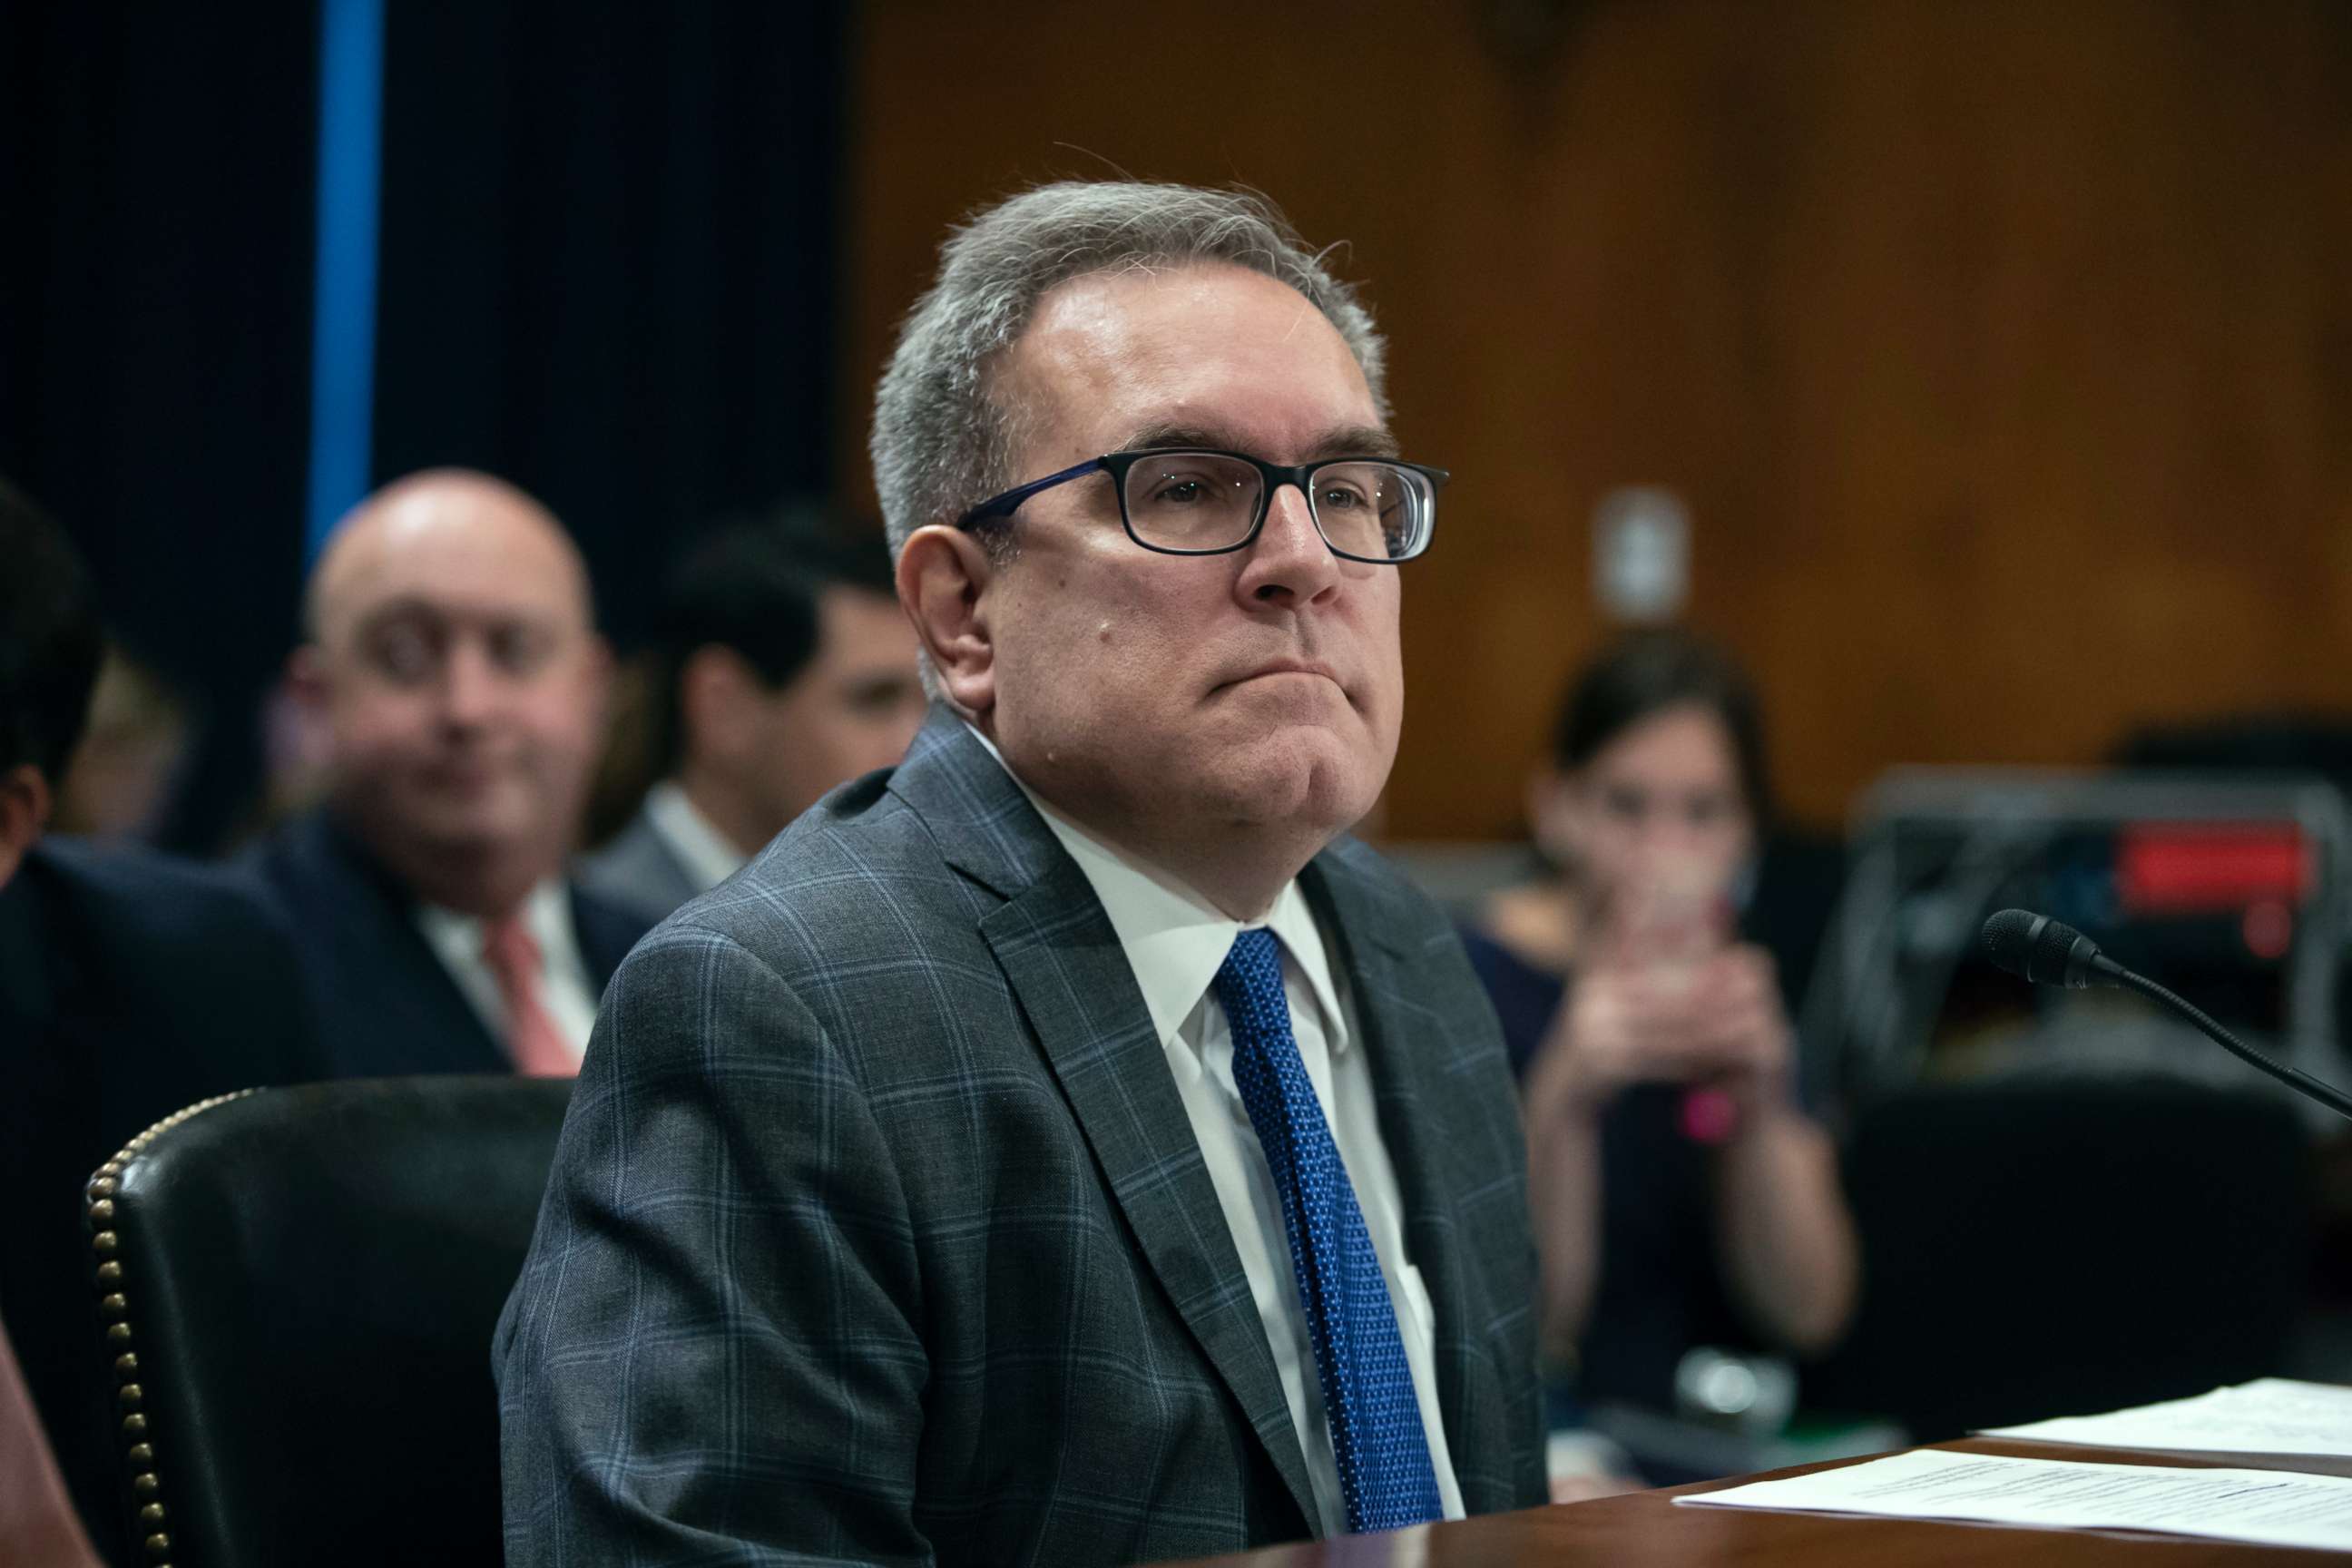 PHOTO: Andrew Wheeler, acting administrator of the Environmental Protection Agency, appears before the Senate Environment and Public Works Committee on Capitol Hill in Washington, Aug. 1, 2018.